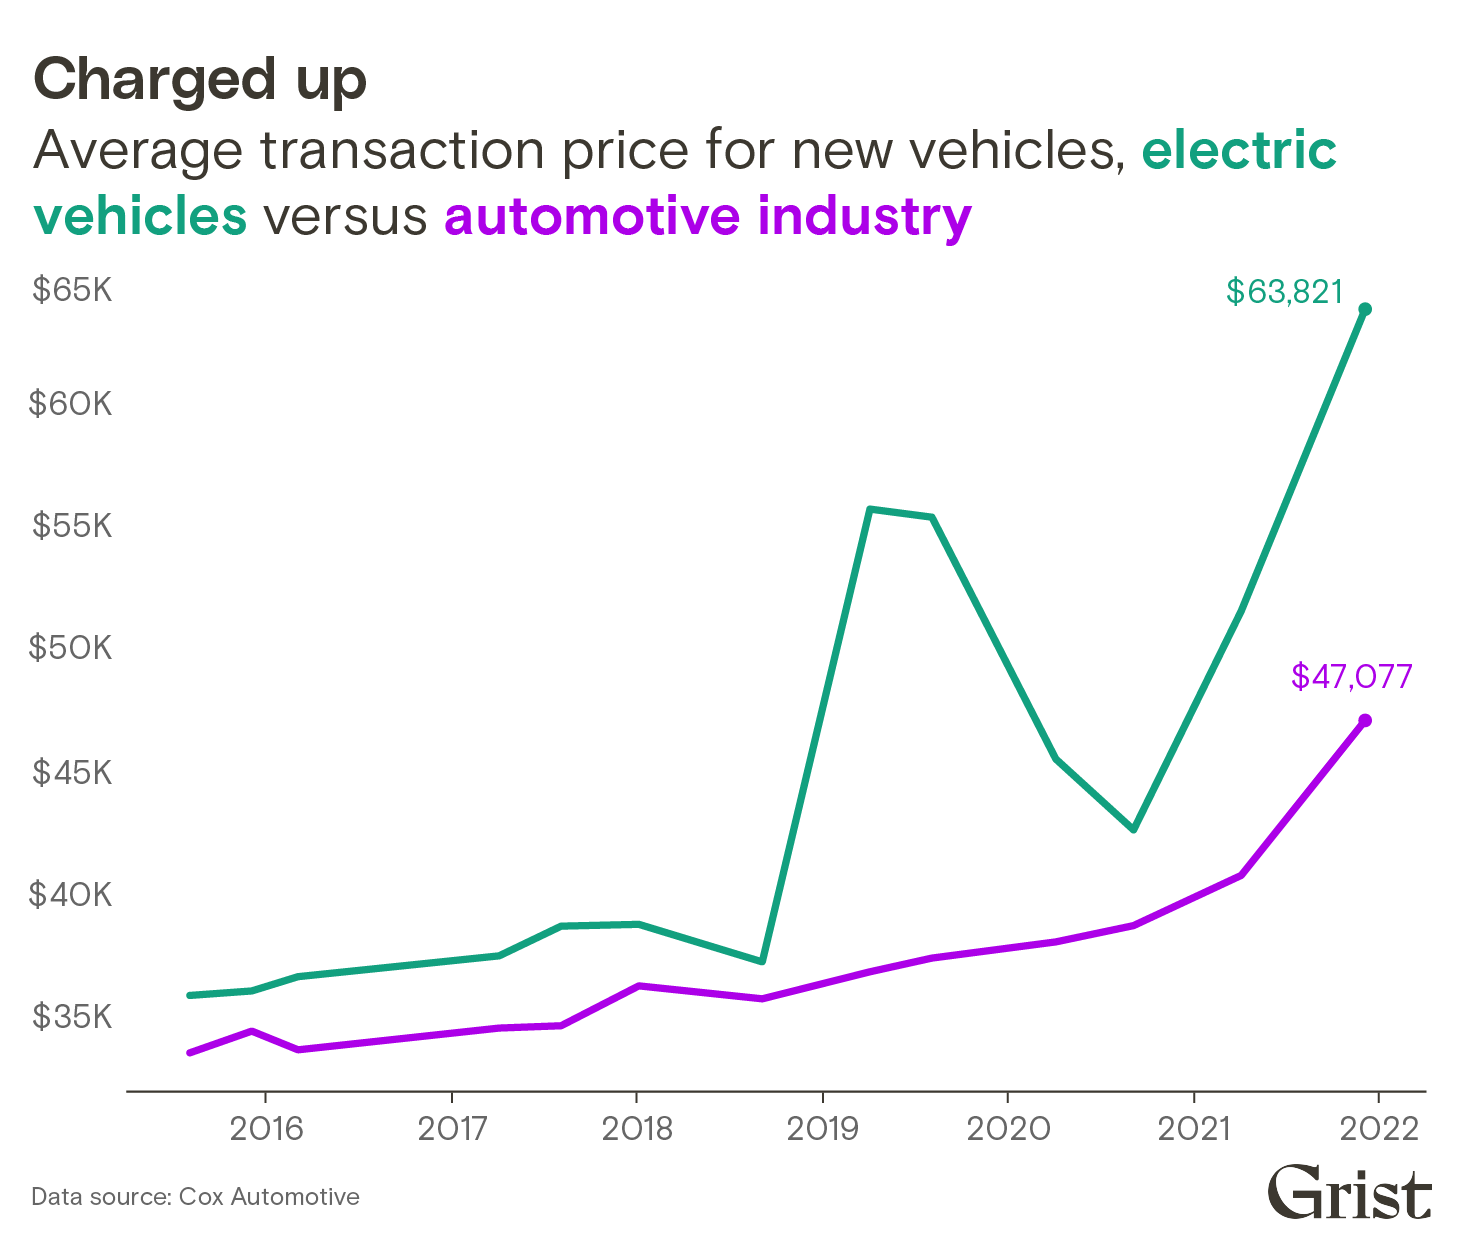 A line chart showing transaction prices for new vehicles from 2015 to 2022, broken down by industry average versus electric vehicles. EVs are still more expensive, relative to industry, though prices are rising across the board in recent years.